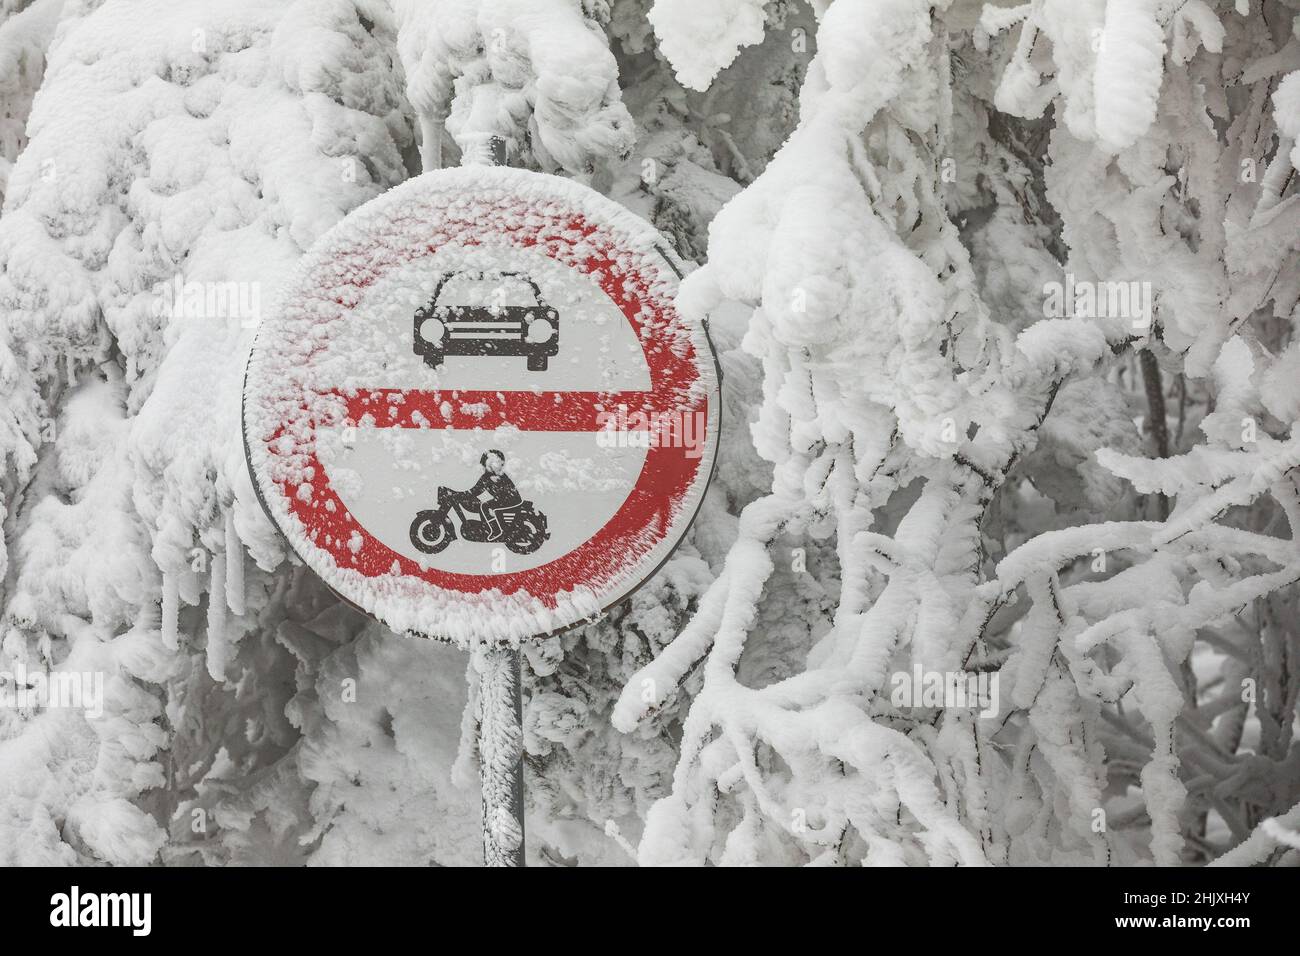 Road sign no entry covered with snow and icicles. Winter snowy landscape and road sign Stock Photo